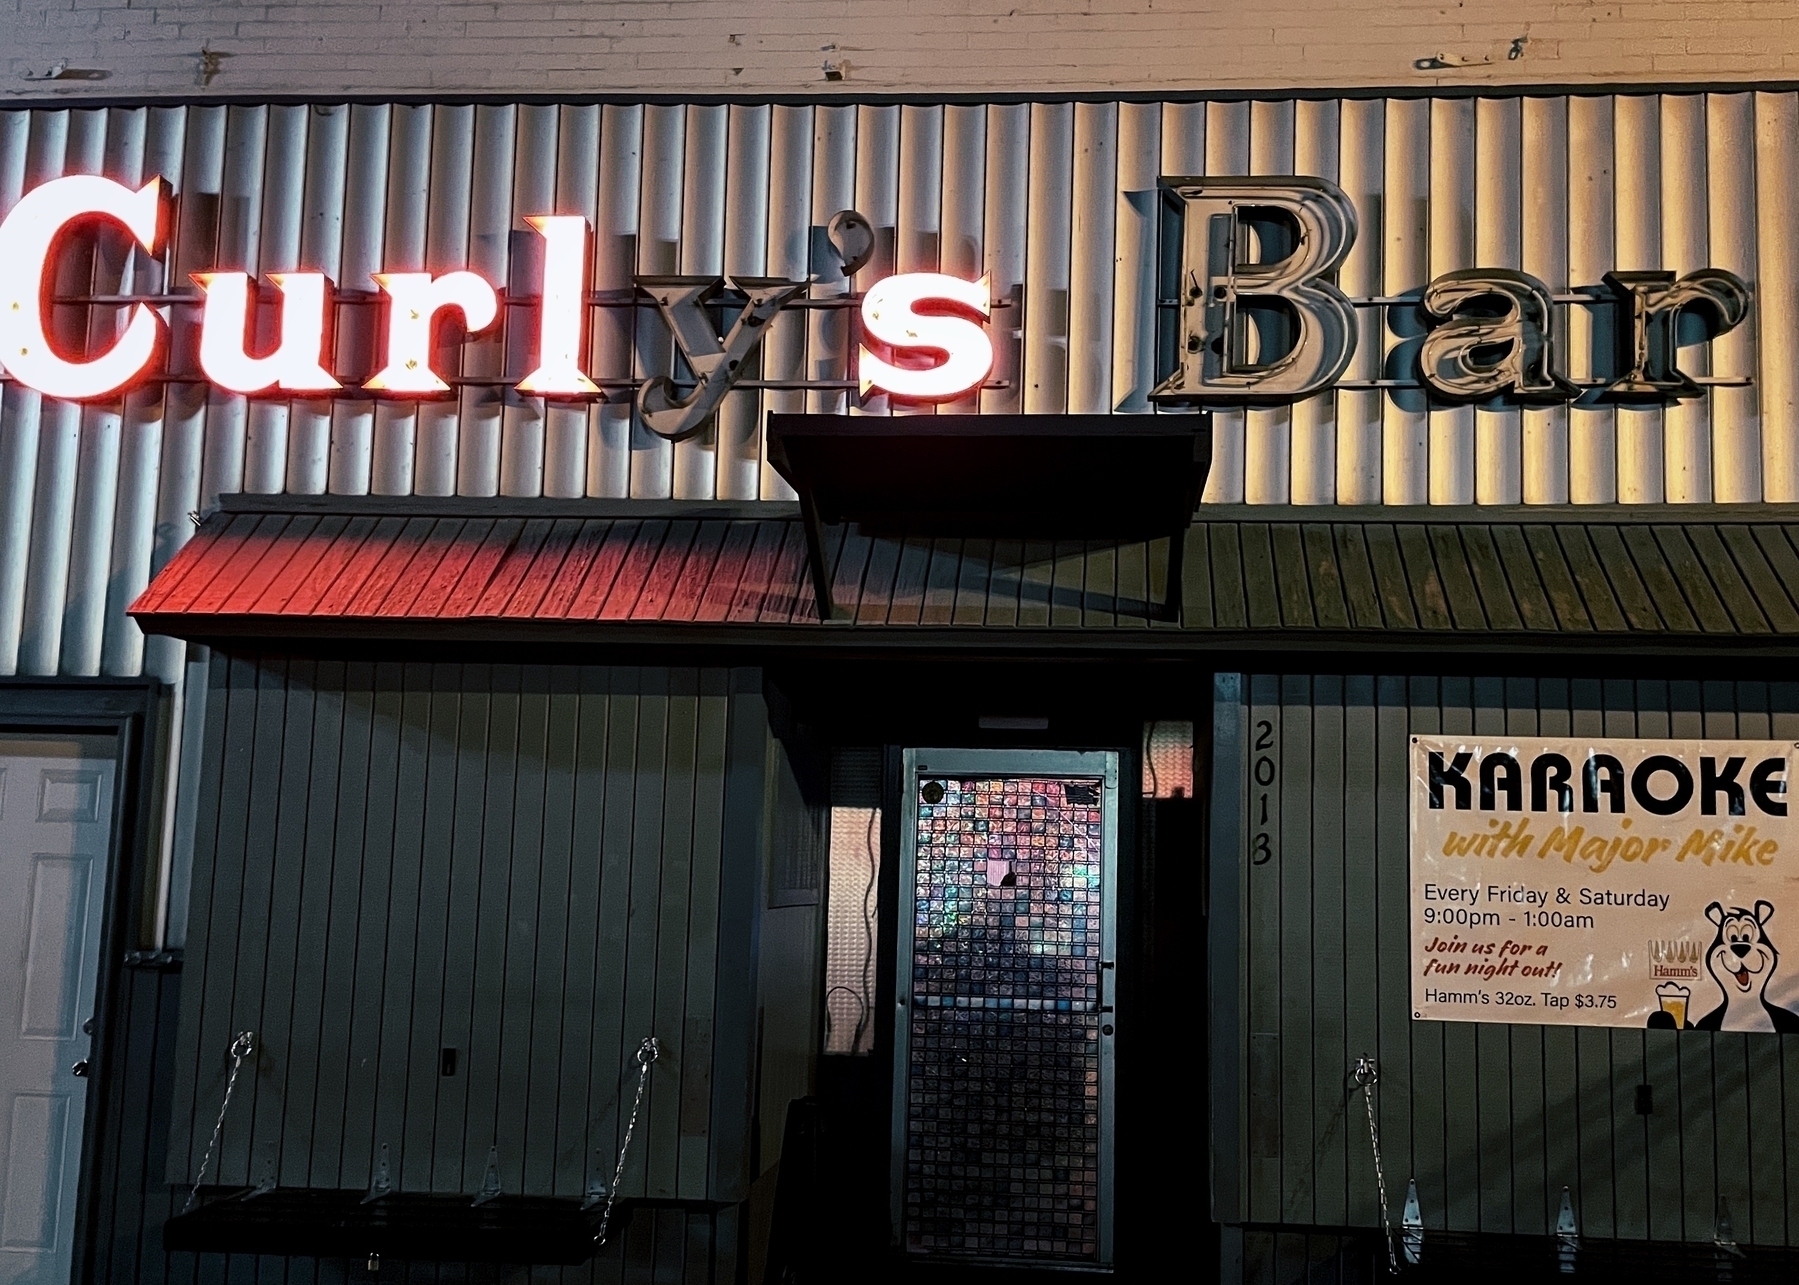 Outside building with neon lettering for ‘Curly’s Bar’